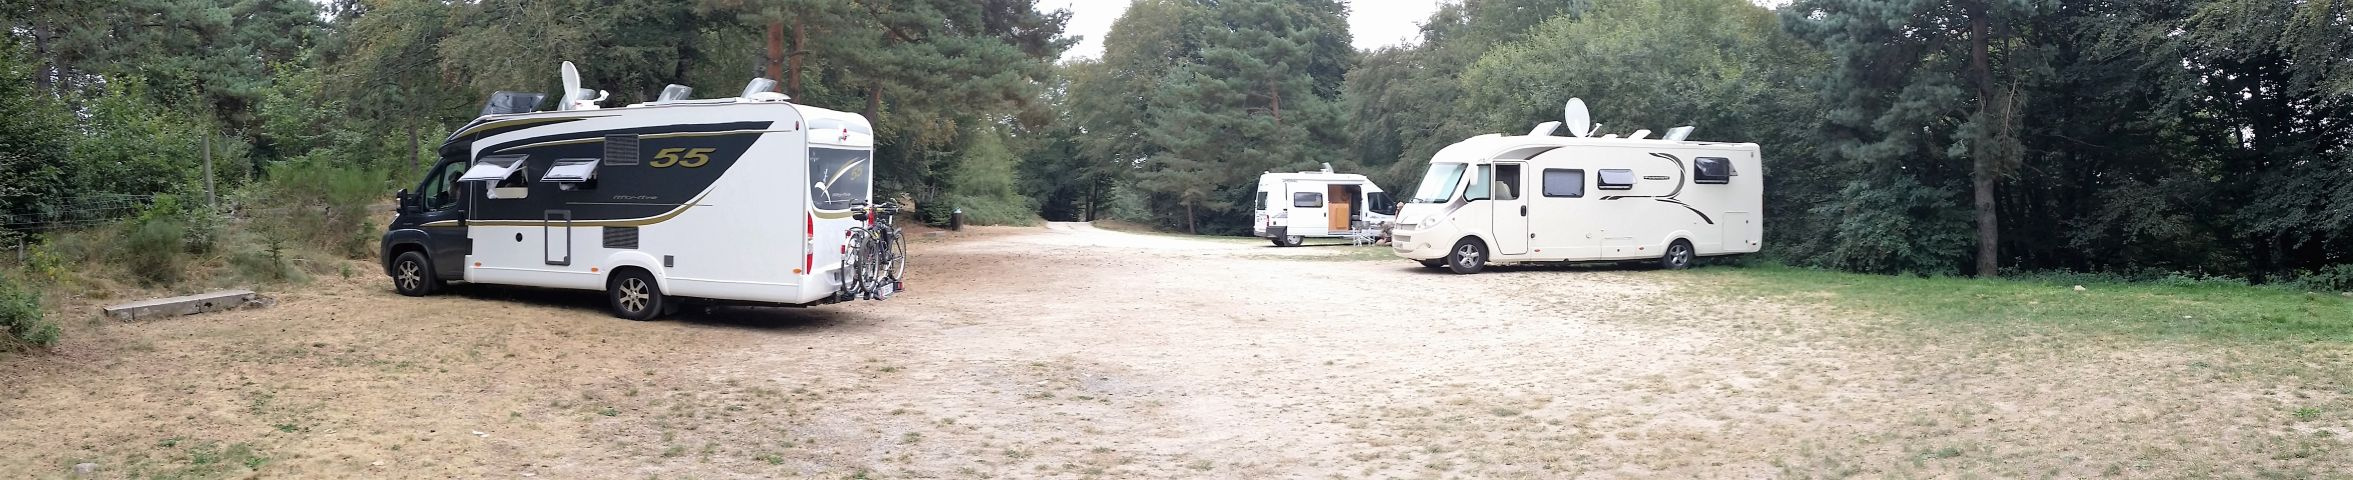  Square was marked in September 2016 as a car park for a camping car.